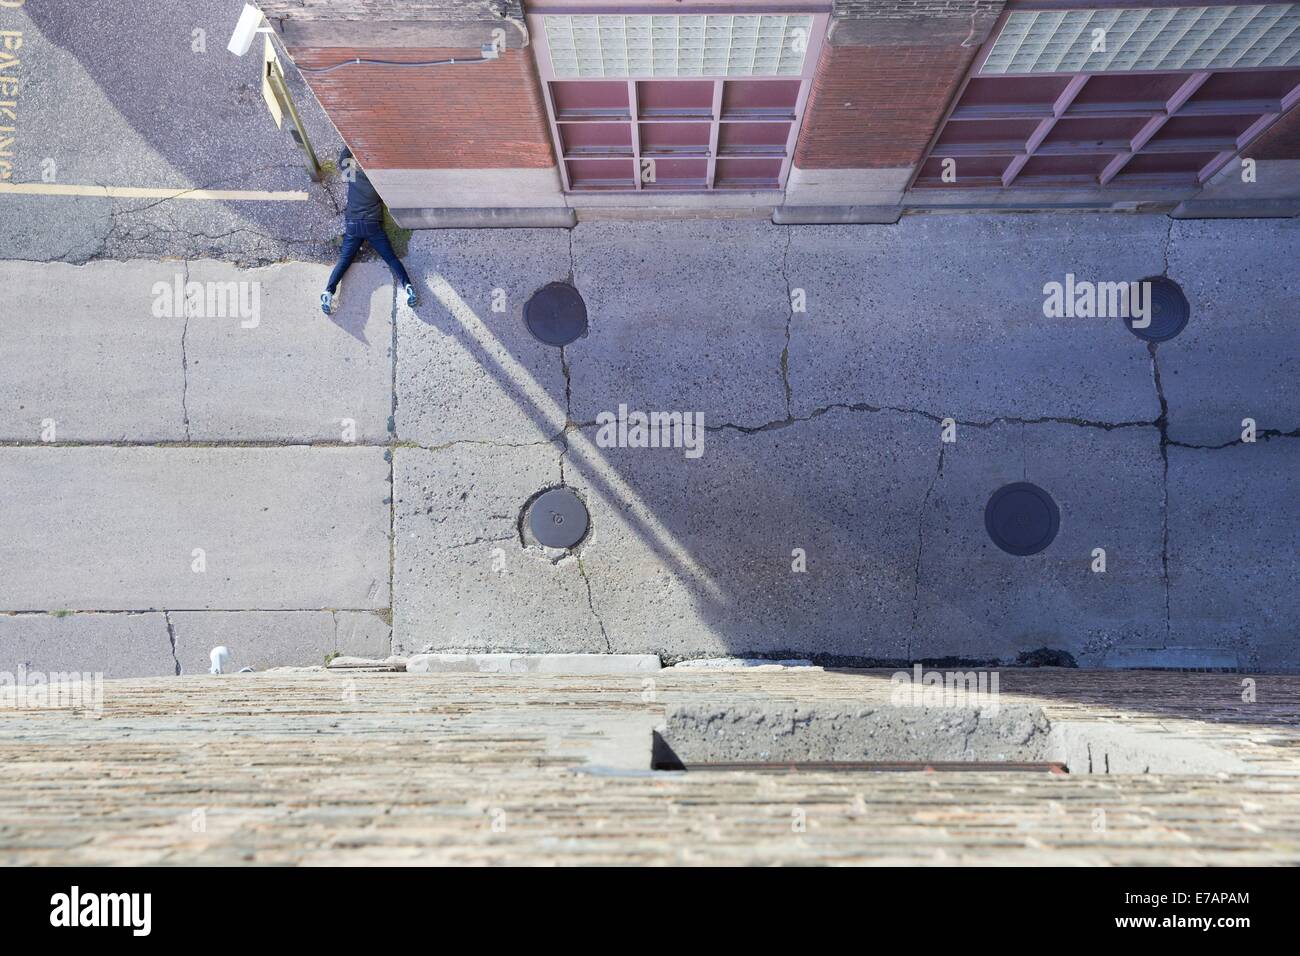 An unconscious person lying face down at the side of an alley Stock Photo